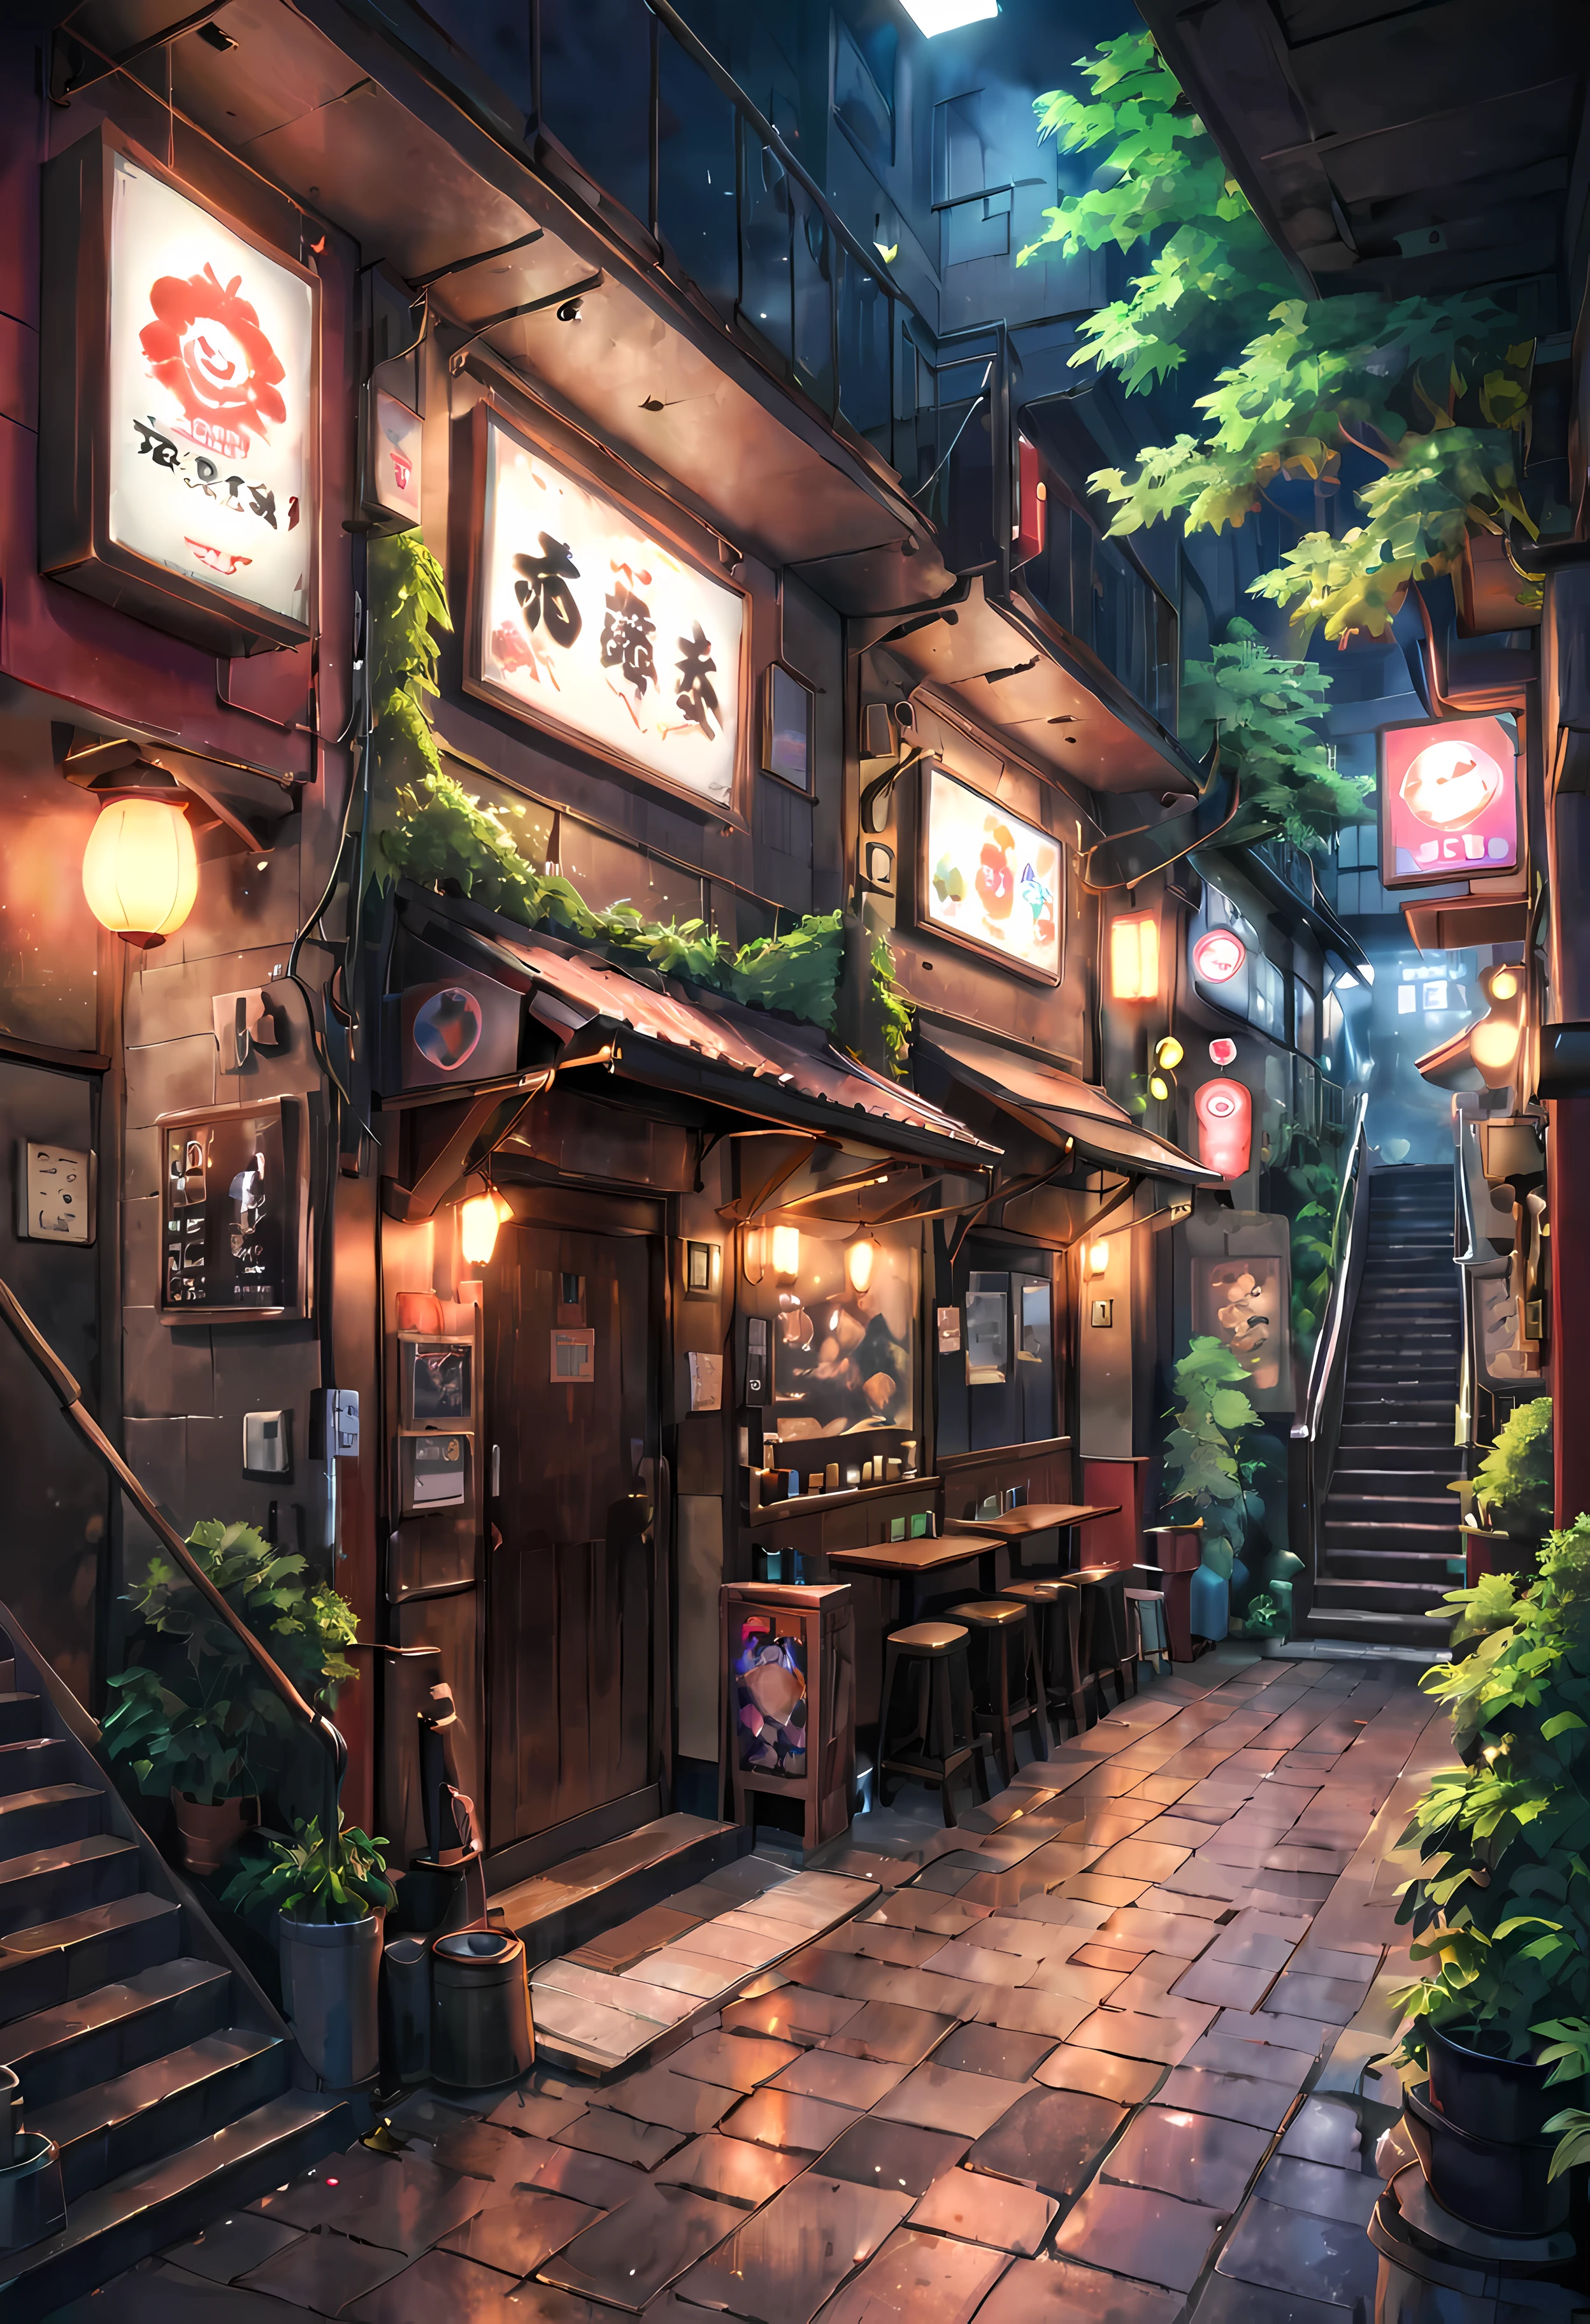 ((best quality,ultra-detailed,realistic):1.37). | anime style,((tokyo underground pub):1.3),((entrance under a stairs):1.25),neon lights,cosplay,graffiti art,no human ,smoky atmosphere,ramen stall,empty tables,hip hop music,techno beats,red brick walls,overgrown vines,sloping ceiling,dark wooden floor,low-lit lamps,distinctive street fashion,flickering lanterns,sake bottles,ramen bowls,wooden barrels,hidden corner seats,vibrant murals,arcade machines,anime posters,glowing neon signs,street vendor food stall,urban underground culture,secretive meeting spot,steaming bowls of miso ramen. | ((Unparalleled sharpness and clarity):1.1), ((Radiosity rendered in stunning 32K resolution):1.3), All captured with sharp focus. | (((More_detail))).